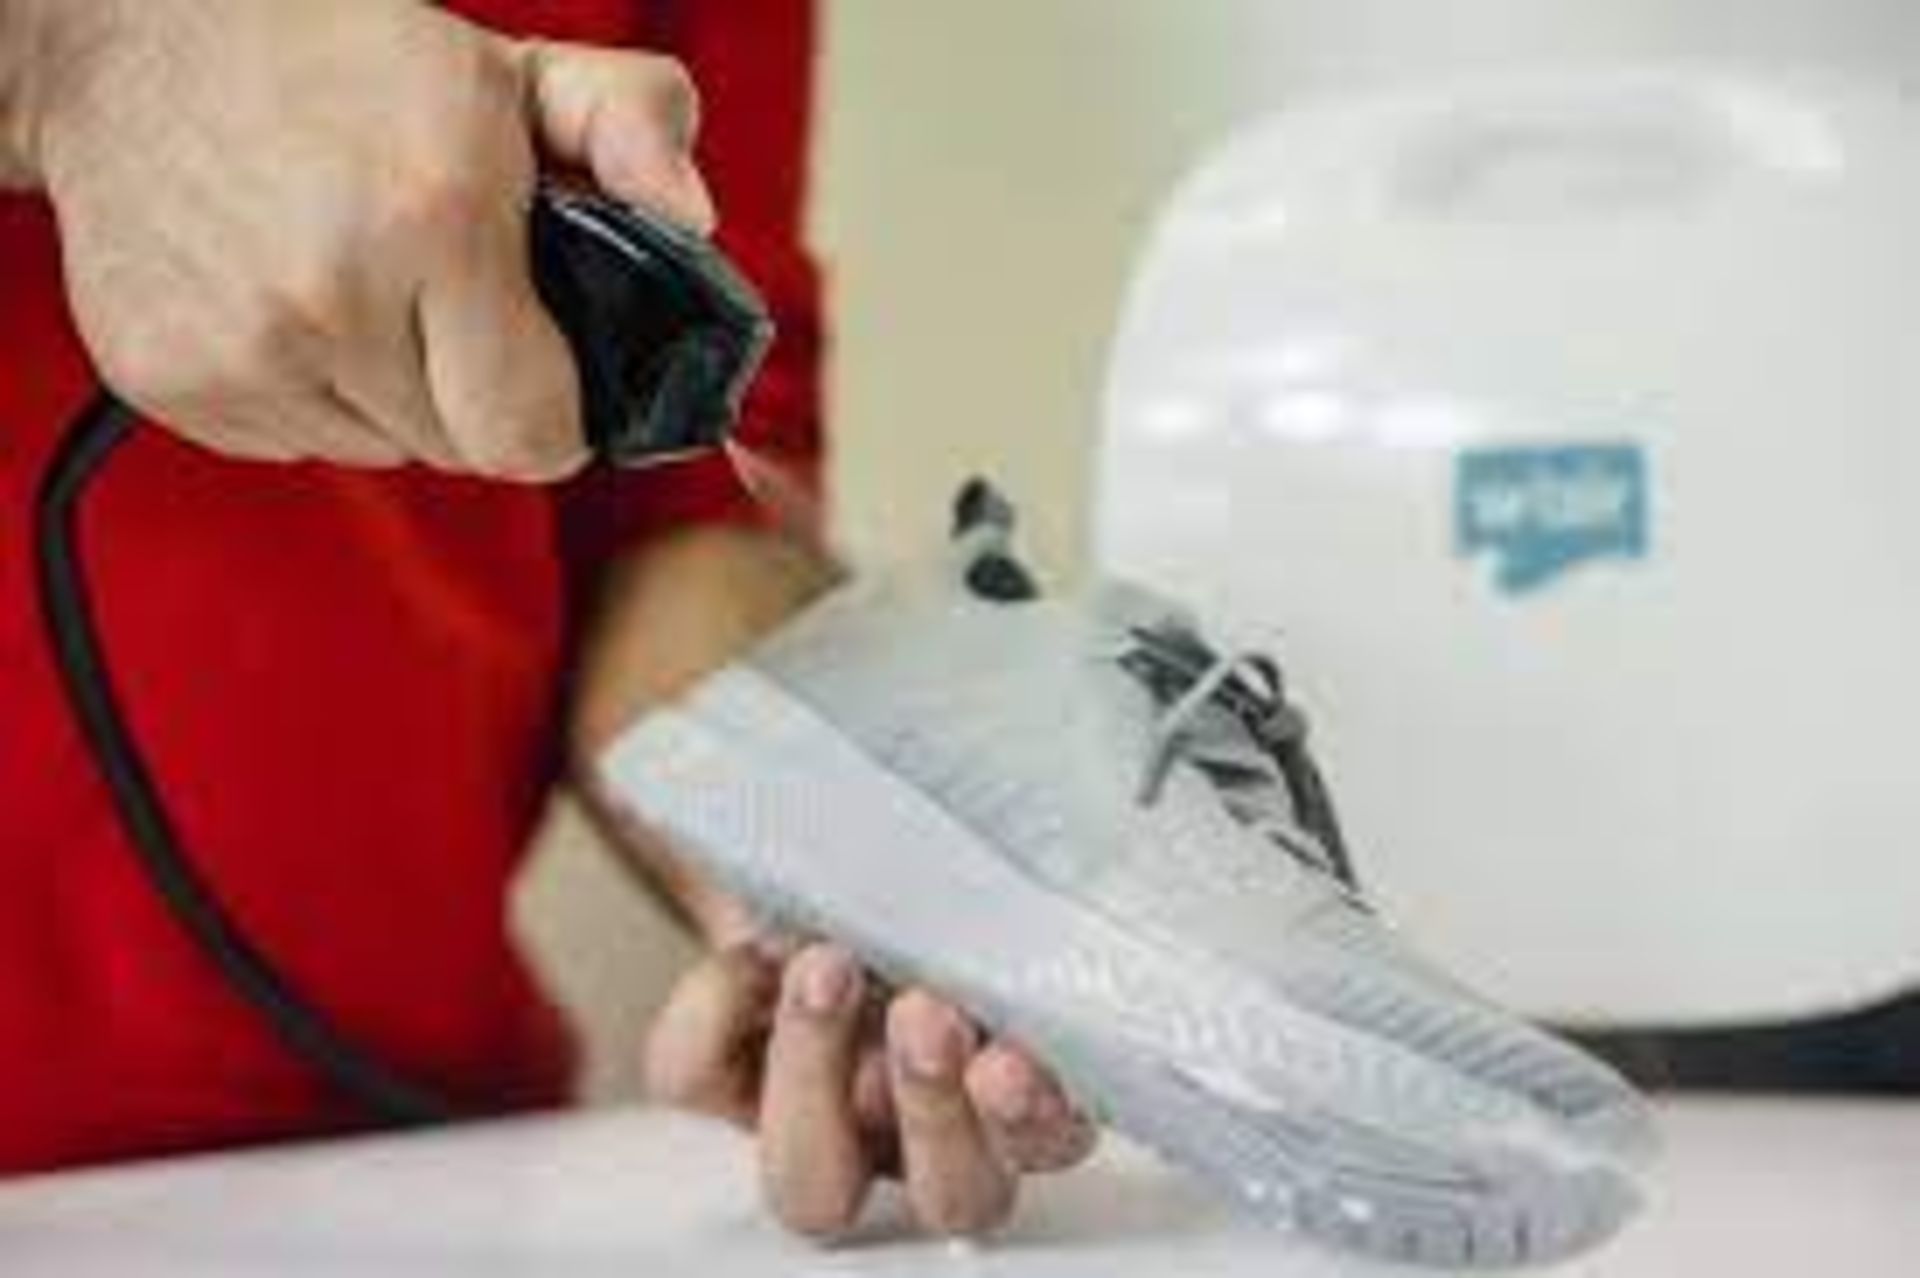 20 X BRAND NEW W'AIR SNEAKER CLEANING SYSTEMS RRP £299, The w'air uses hydrodynamic technology - Image 3 of 6